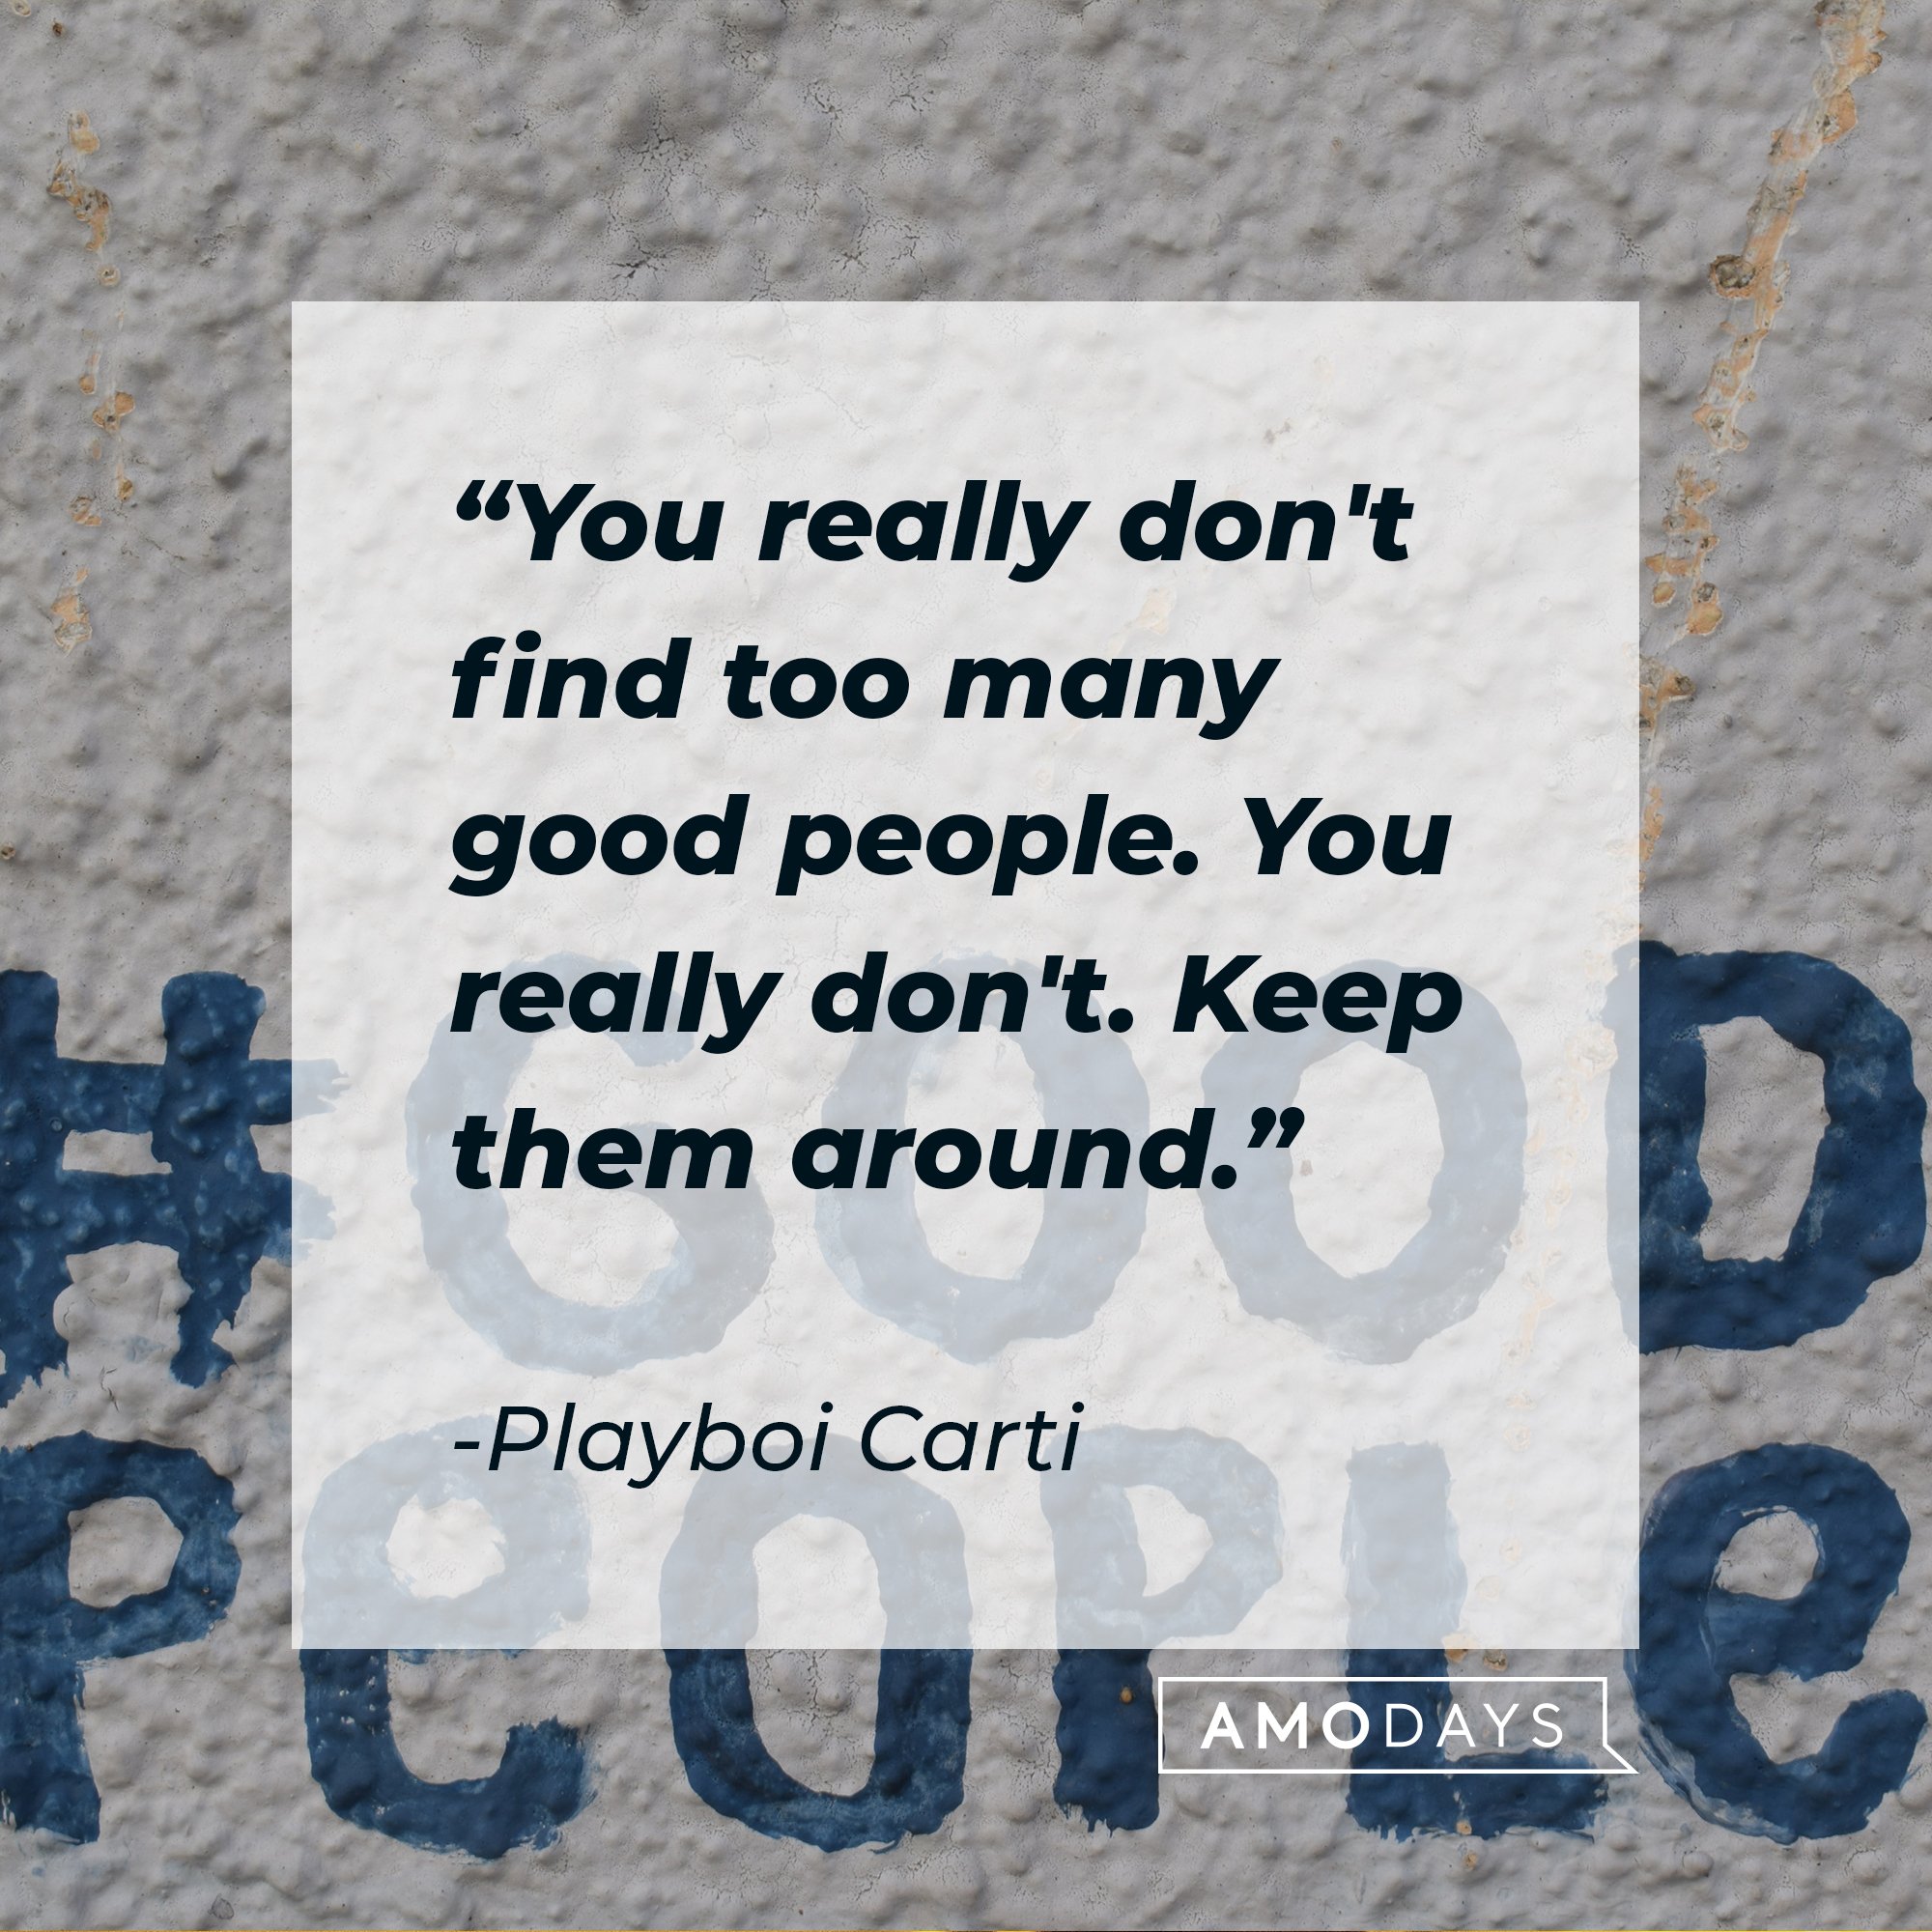 Playboi Carti ‘s quote: "You really don't find too many good people. You really don't. Keep them around." | Image: AmoDays